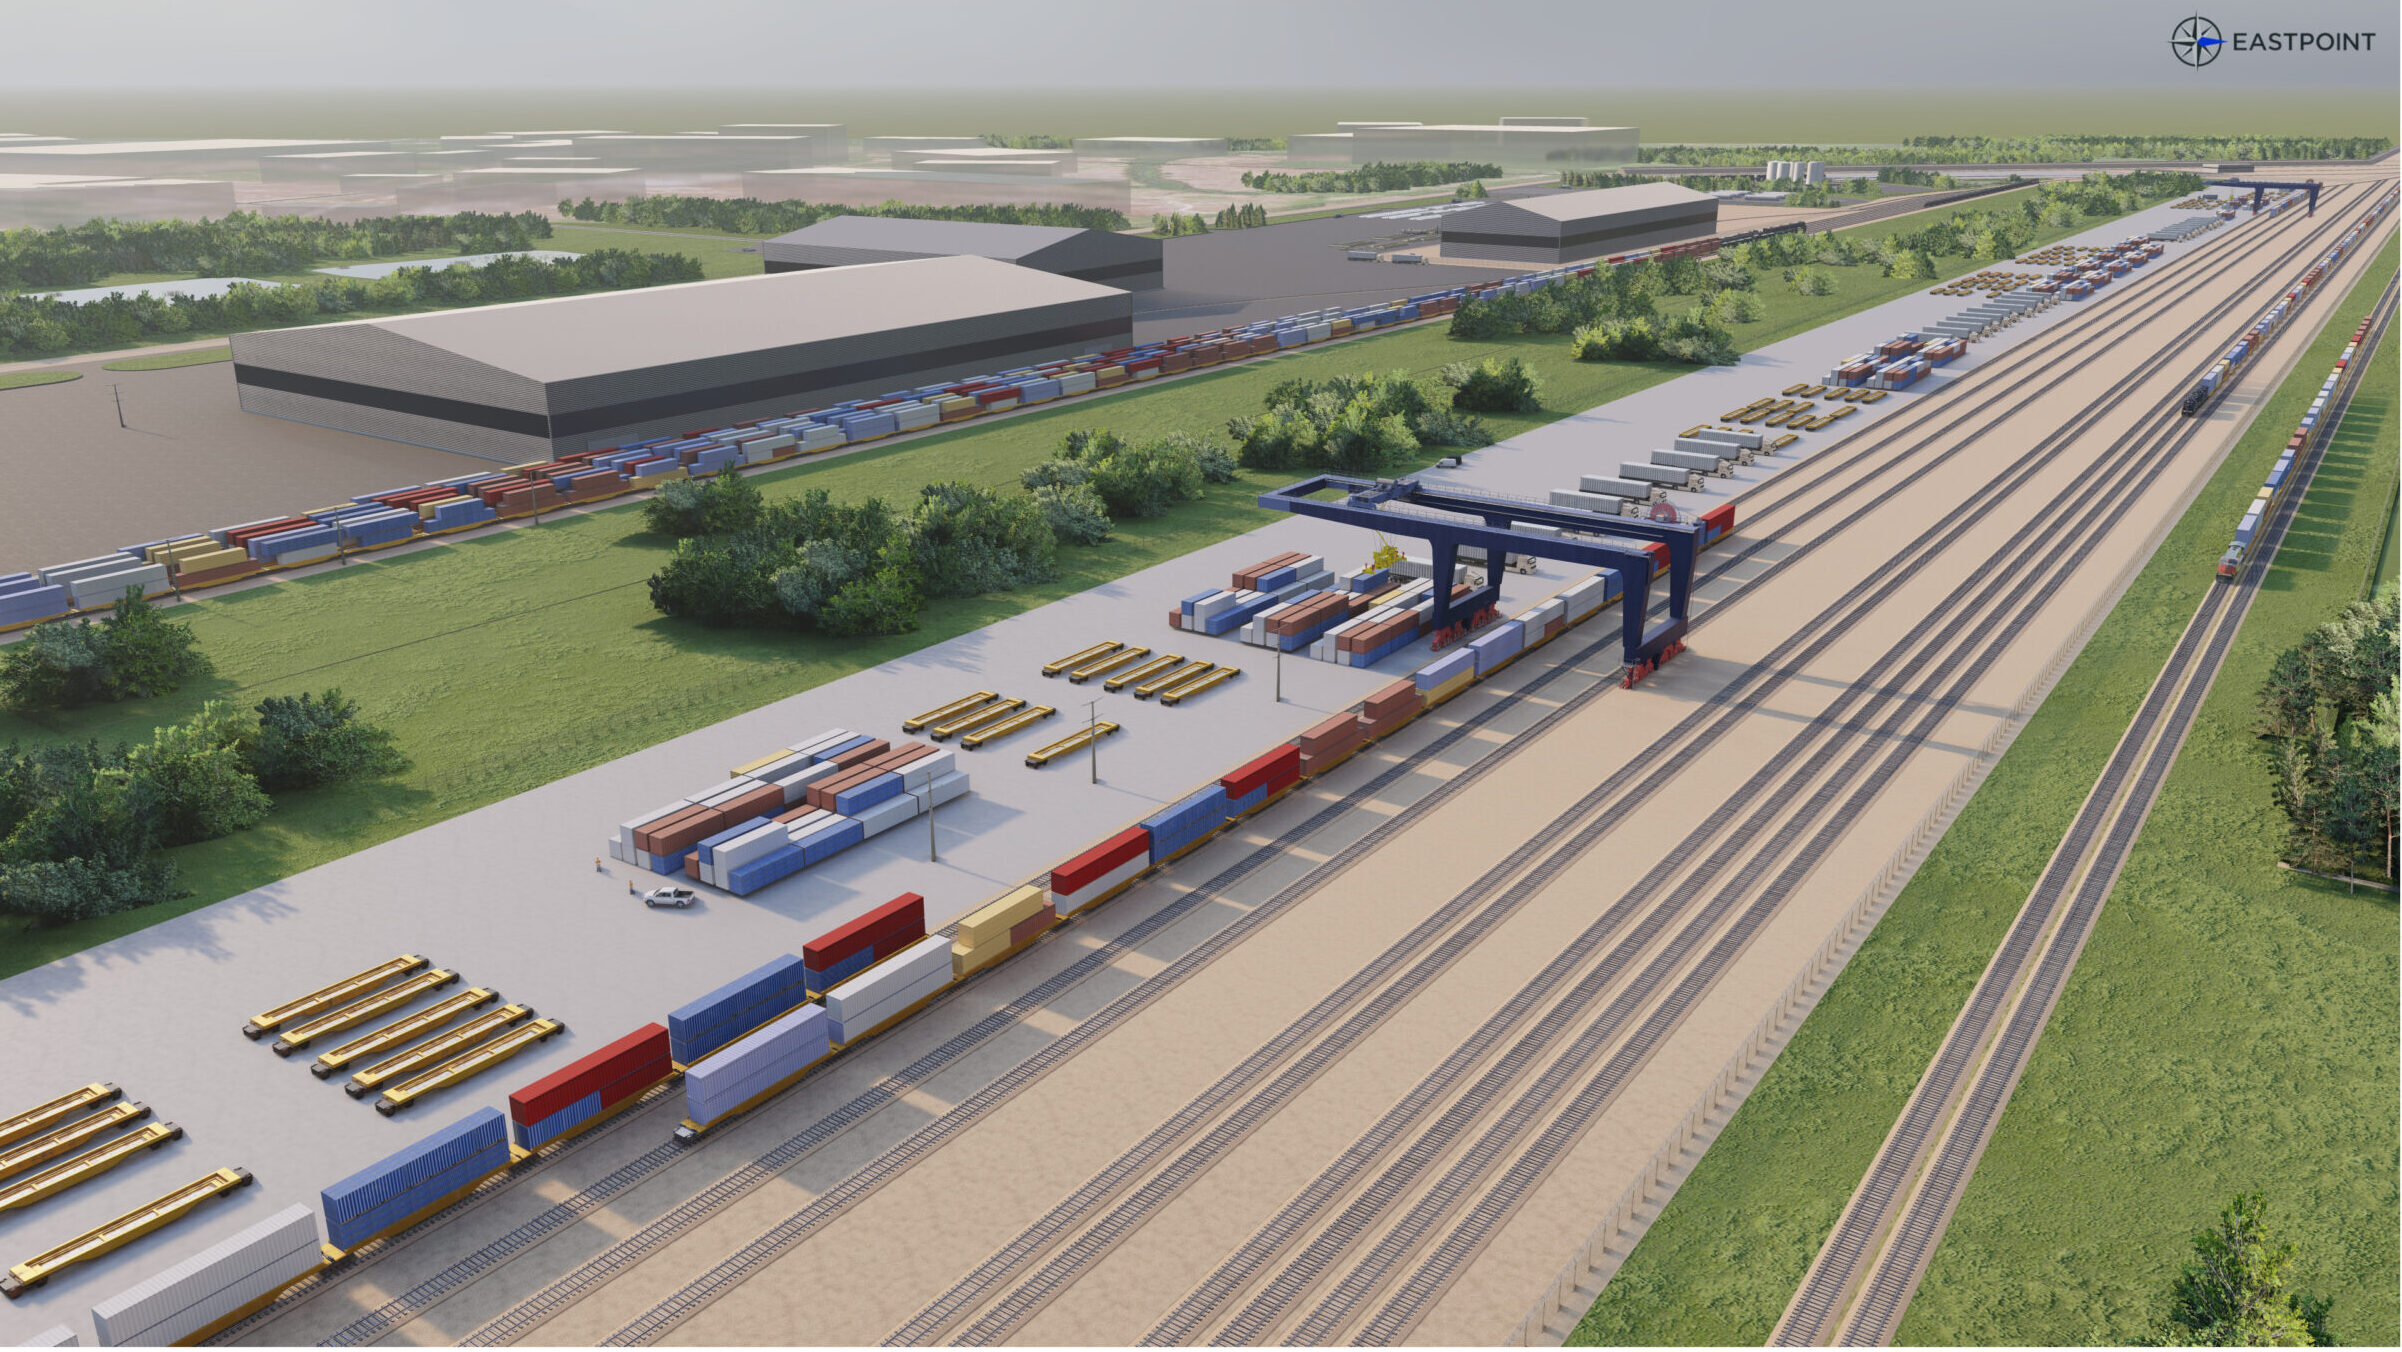 A digital rendering of a large inland rail terminal featuring rail tracks, boxcars, warehouses, and large parking lots within a green vista.